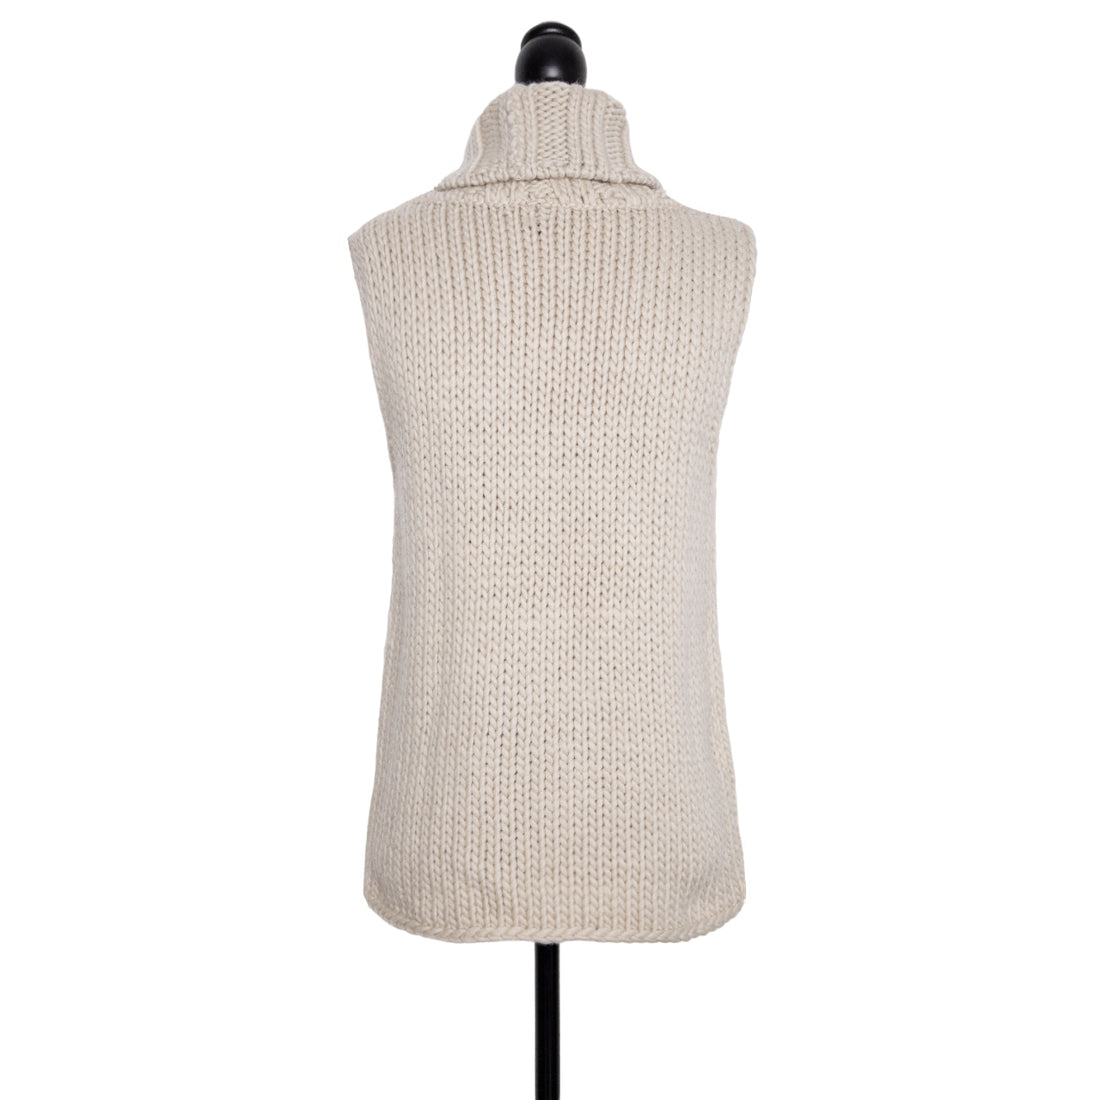 Gucci sleeveless top in chunky knit wool with turtleneck